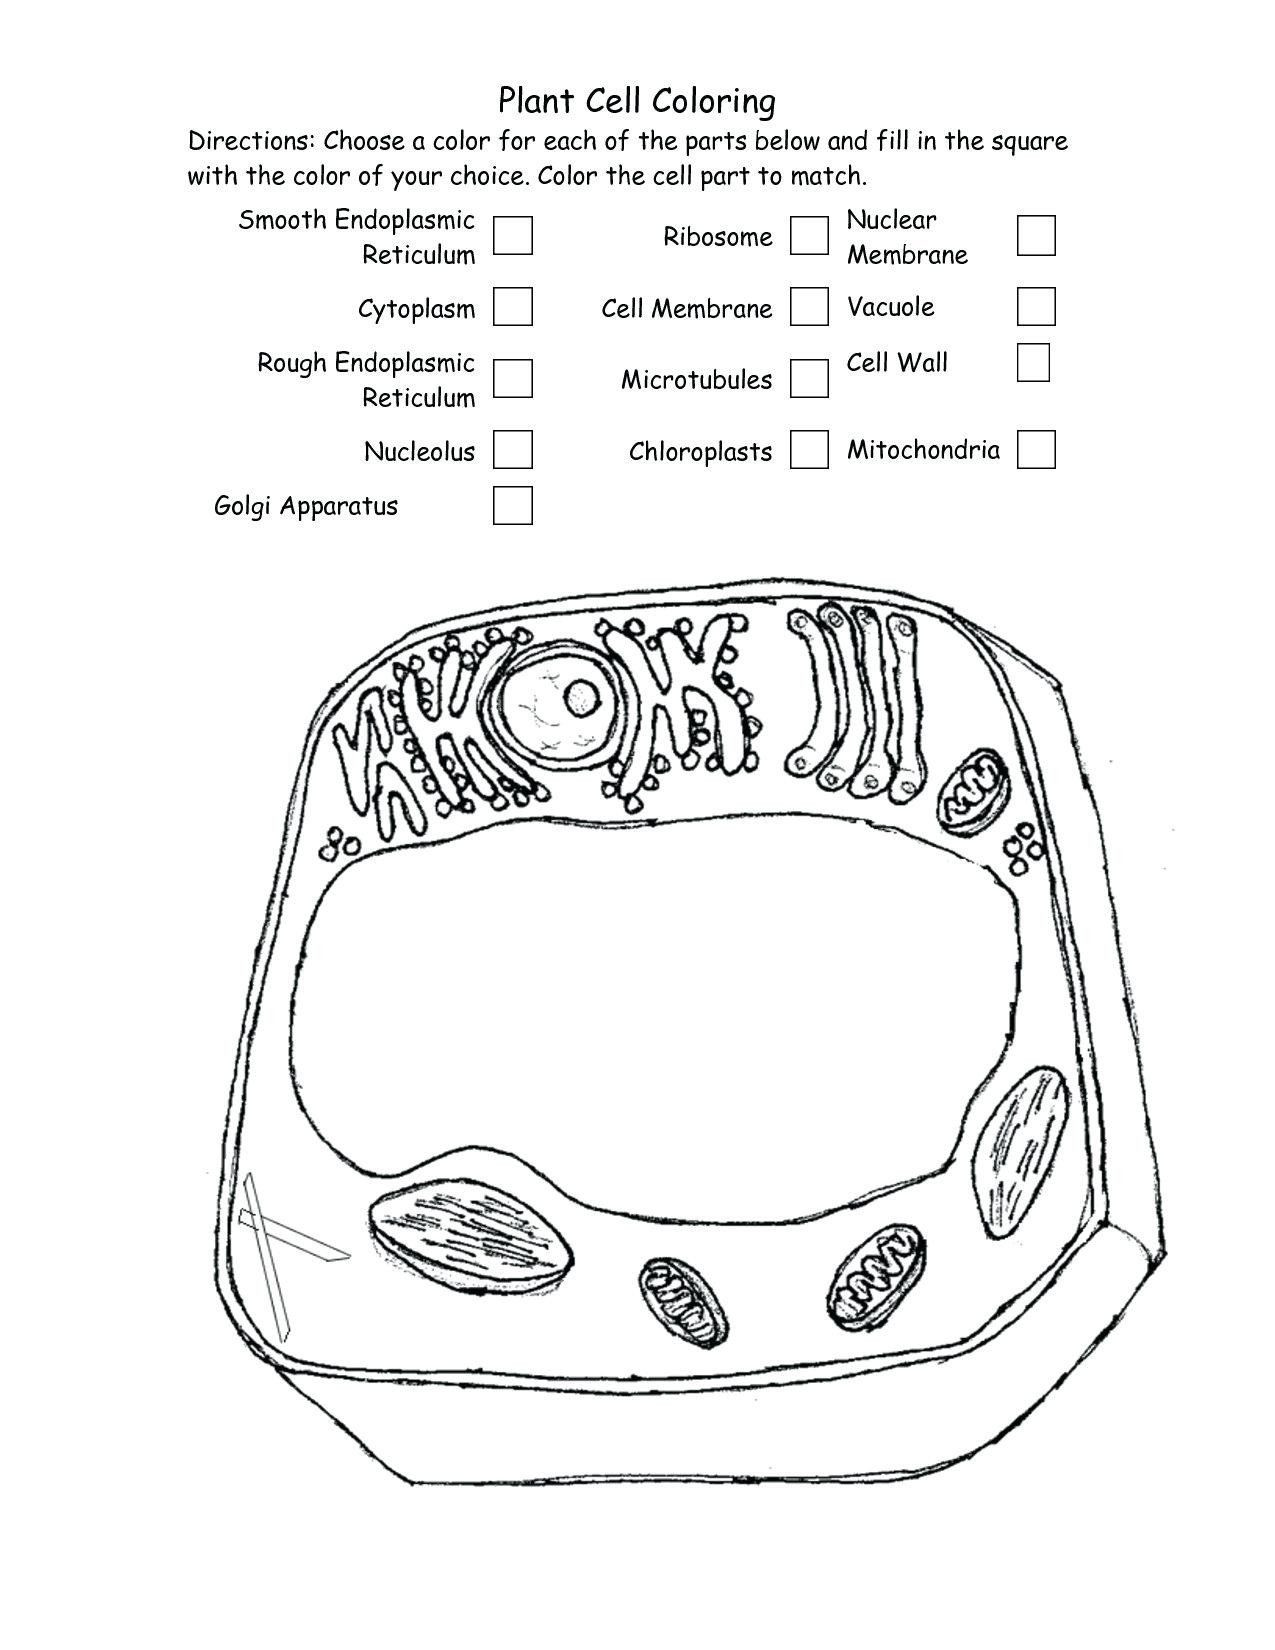 Plant Cell Coloring Worksheet Plant Cell Coloring Key Inspirational Plant Diagram Coloring